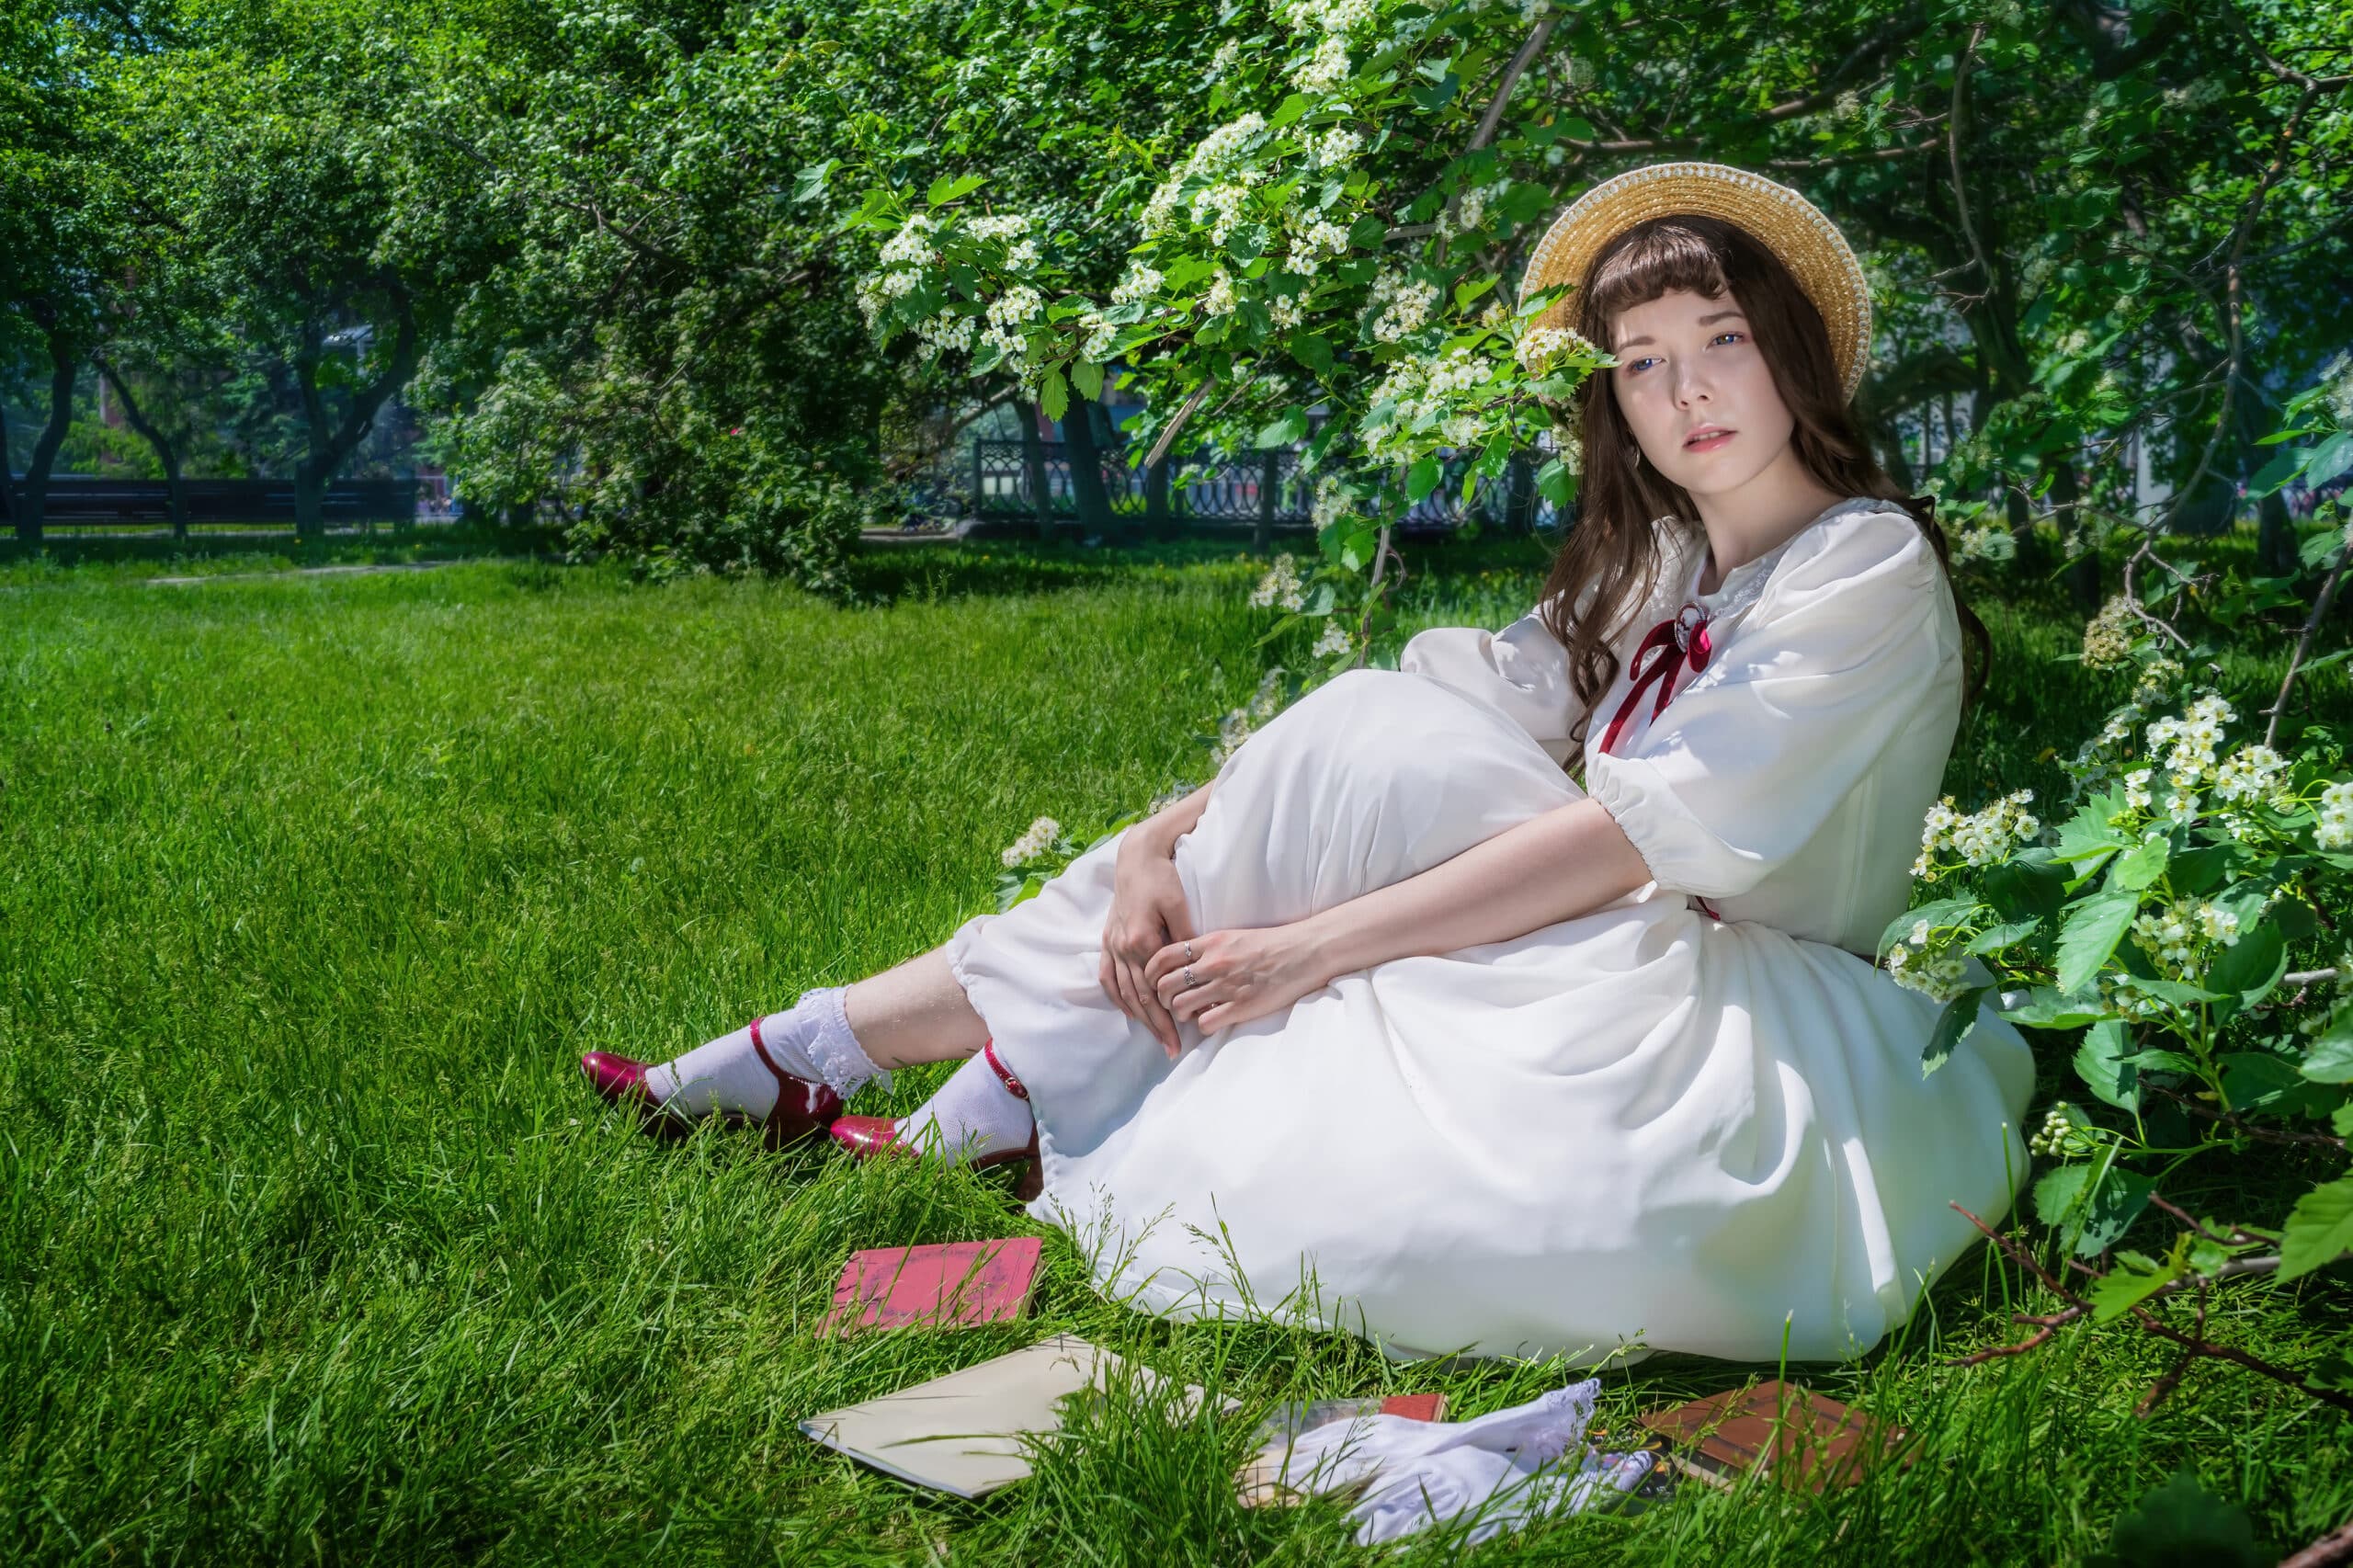 Nice girl in a white dress sits on a lawn in a park, books and notebooks spread in front